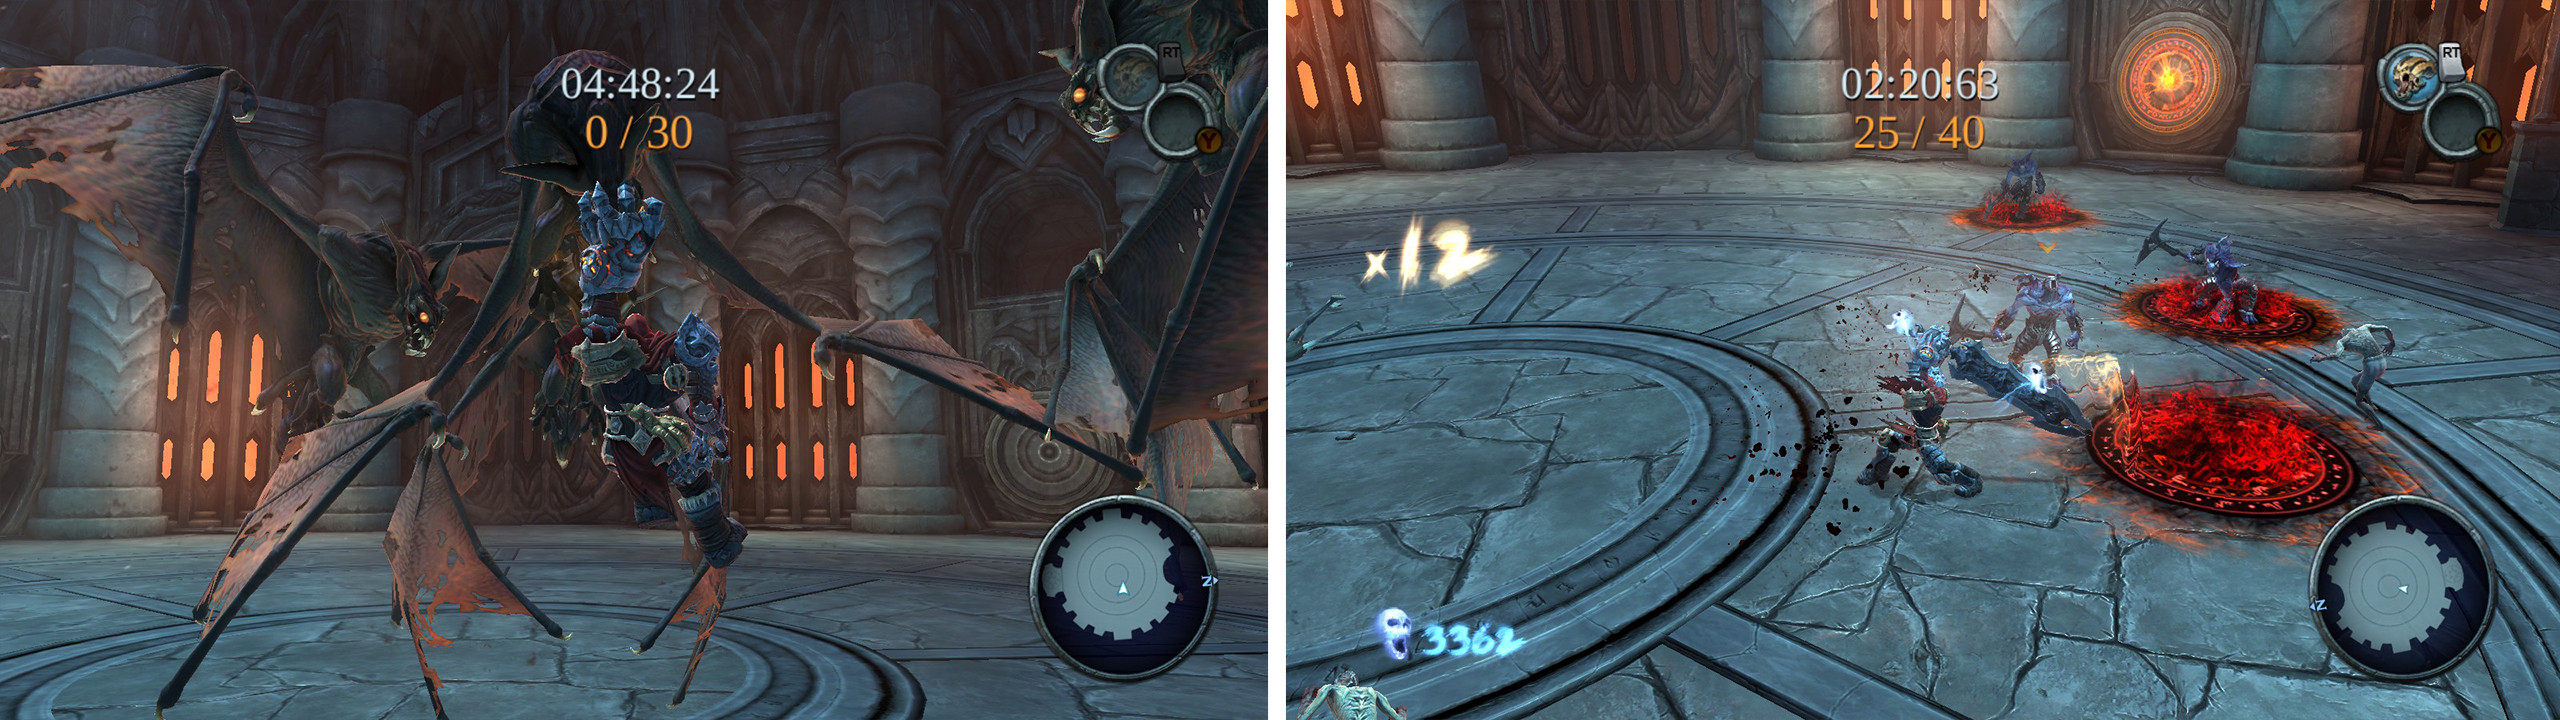 If you can chain together 5 duskwing finisher kills in Challenge 3 you’ll earn an achievement/trophy (left). You’ll face an array of enemies during Challenge 4 (right).